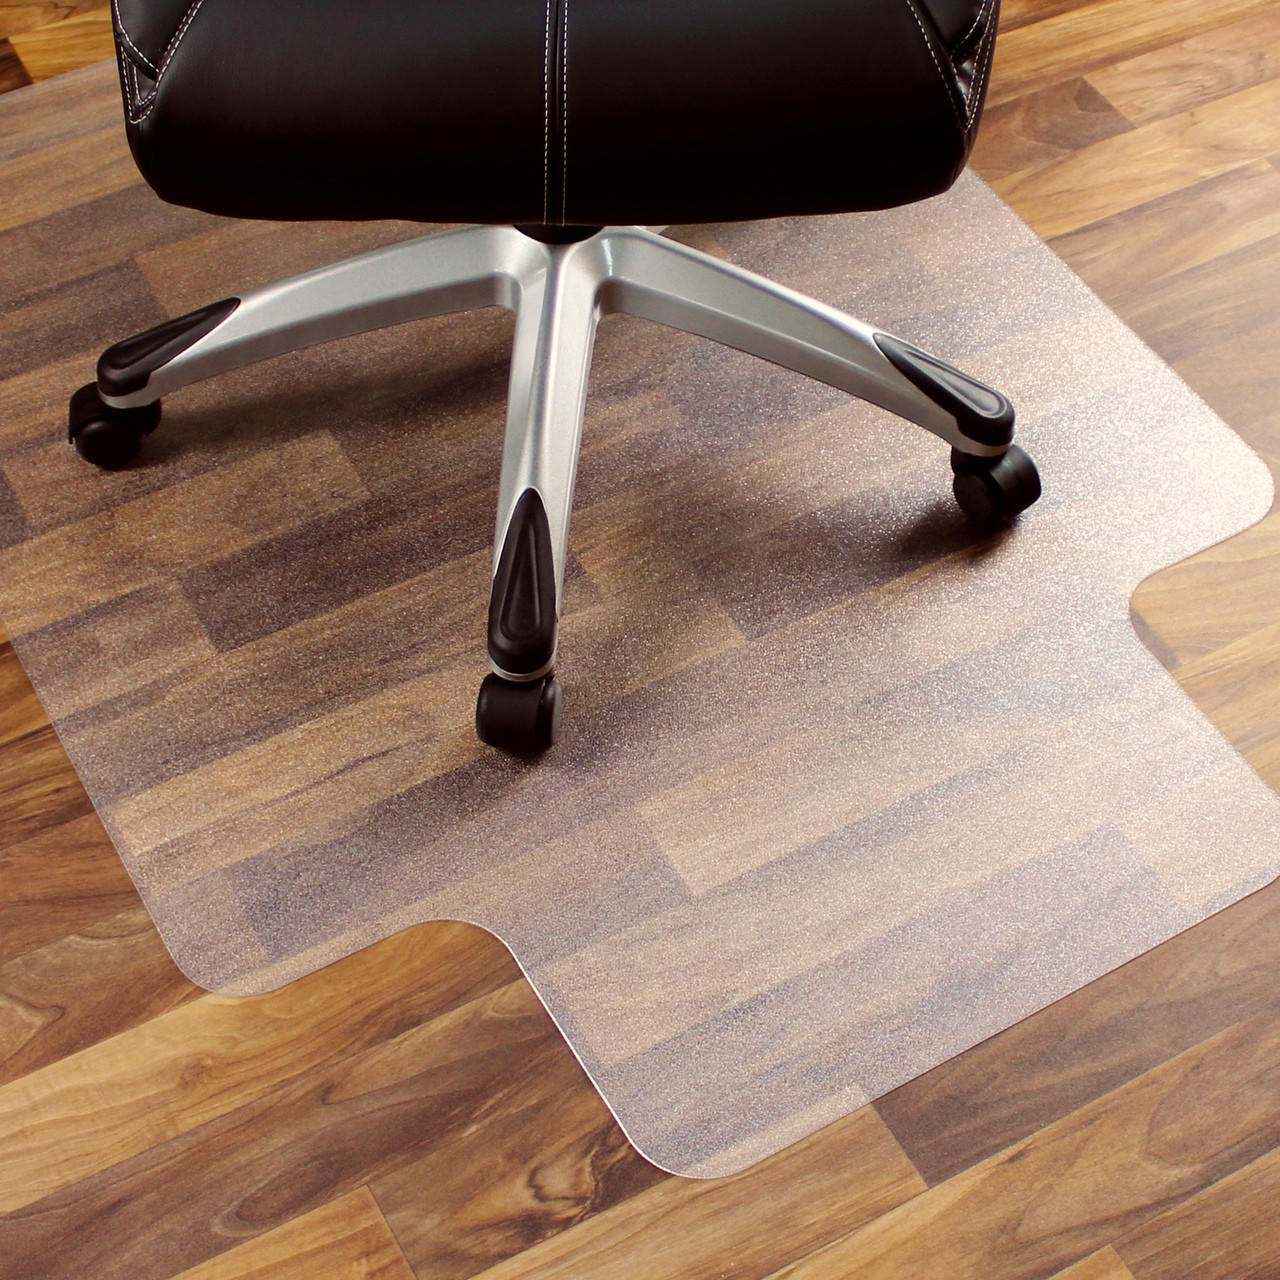 Marvelux 36 x 48 Polycarbonate (PC) Lipped Chair Mat for Hard Floors